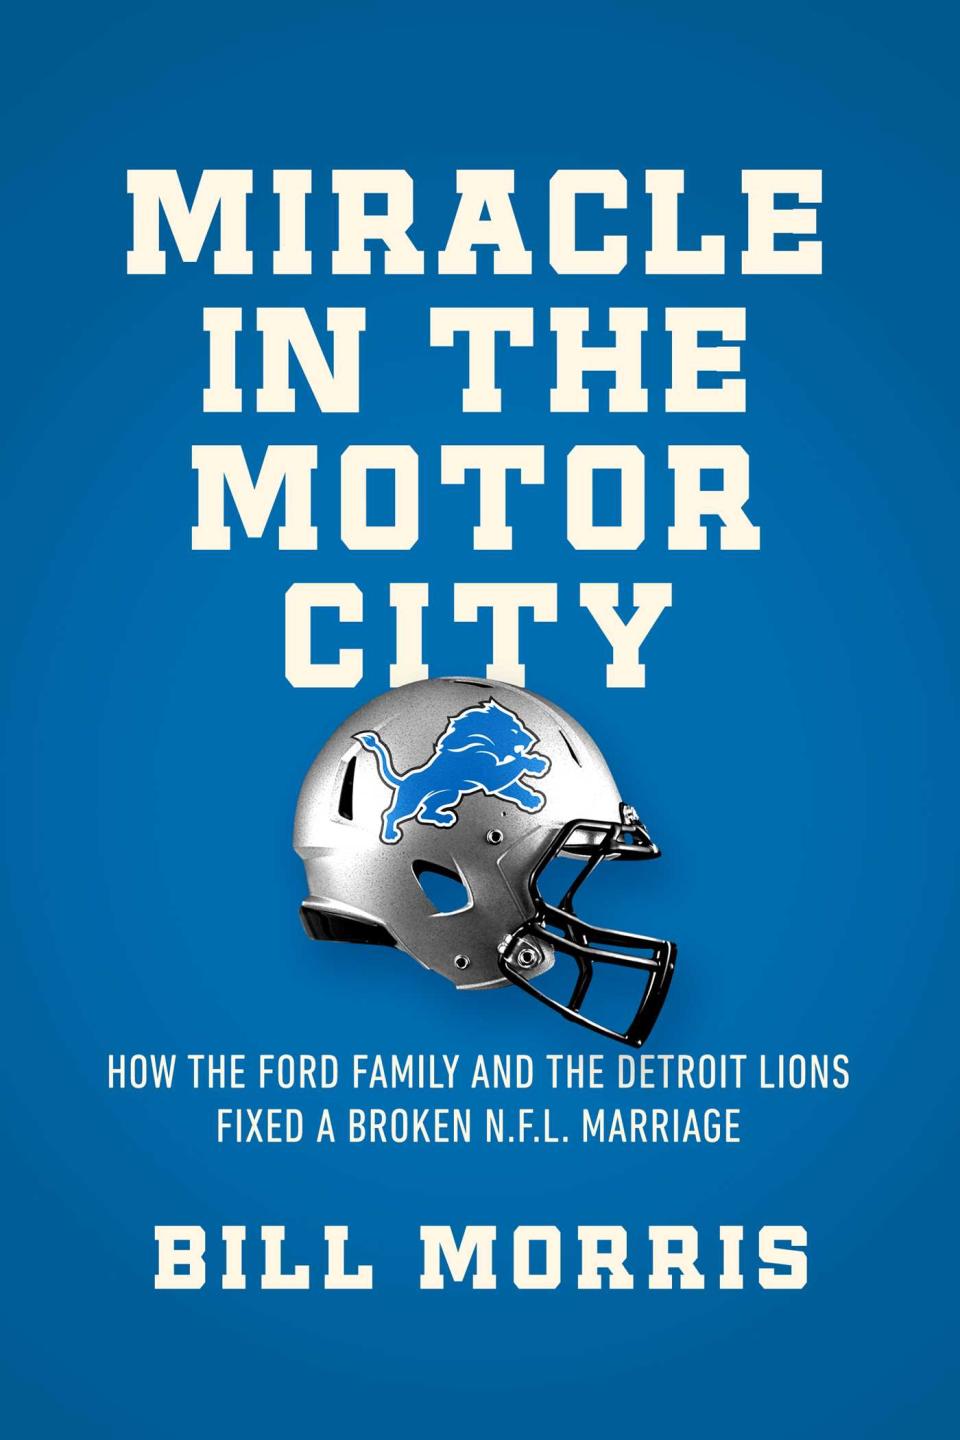 "Miracle in the Motor City" by Bill Morris, examines the six decades that the Ford Family has owned the Detroi Lions.